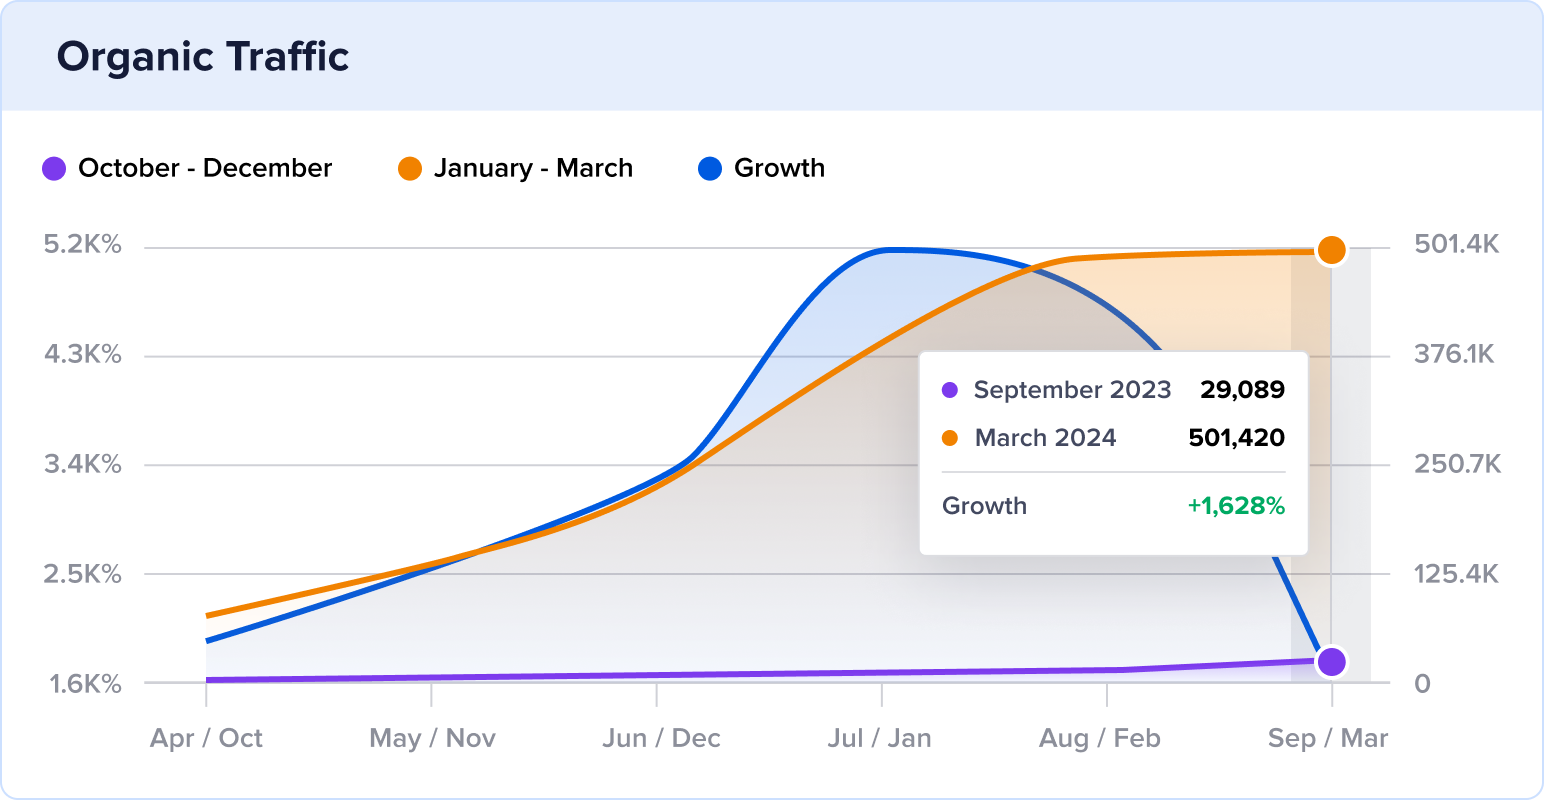 RedSwitches 6 month organic traffic growth.